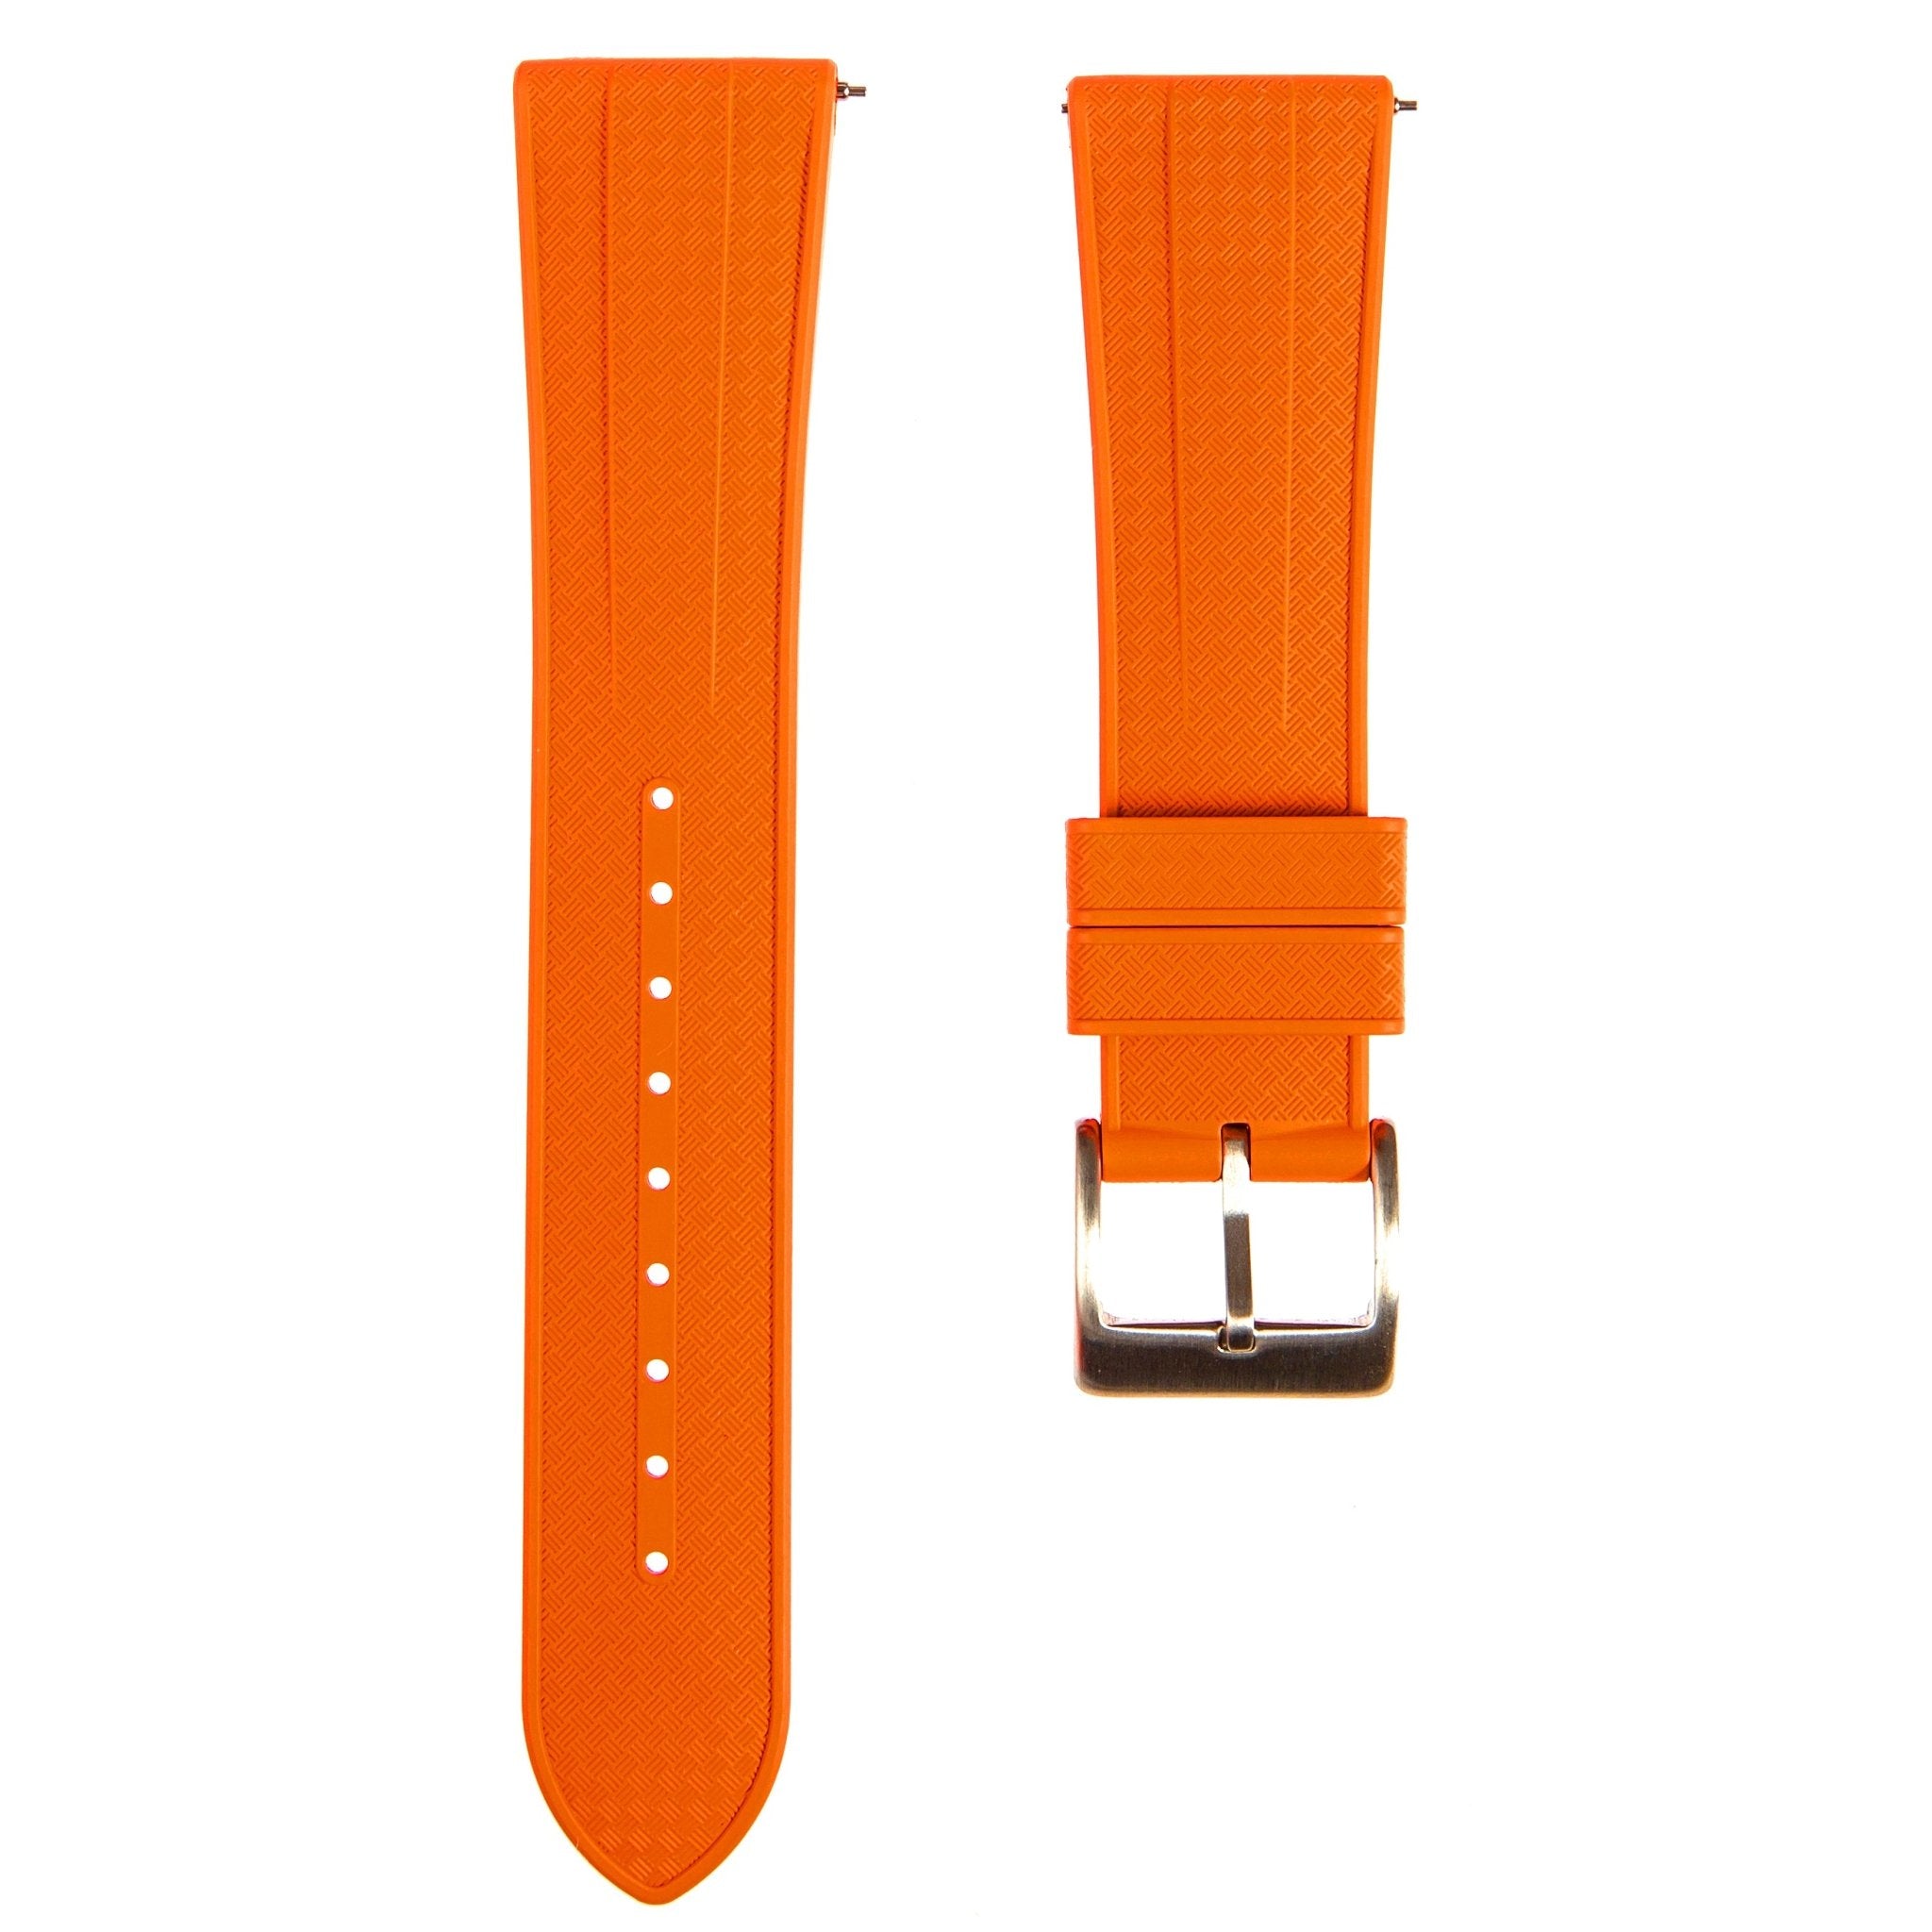 Grid FKM Rubber Strap - Quick-Release – Compatible with Blancpain x Swatch - Orange (2412) -StrapSeeker